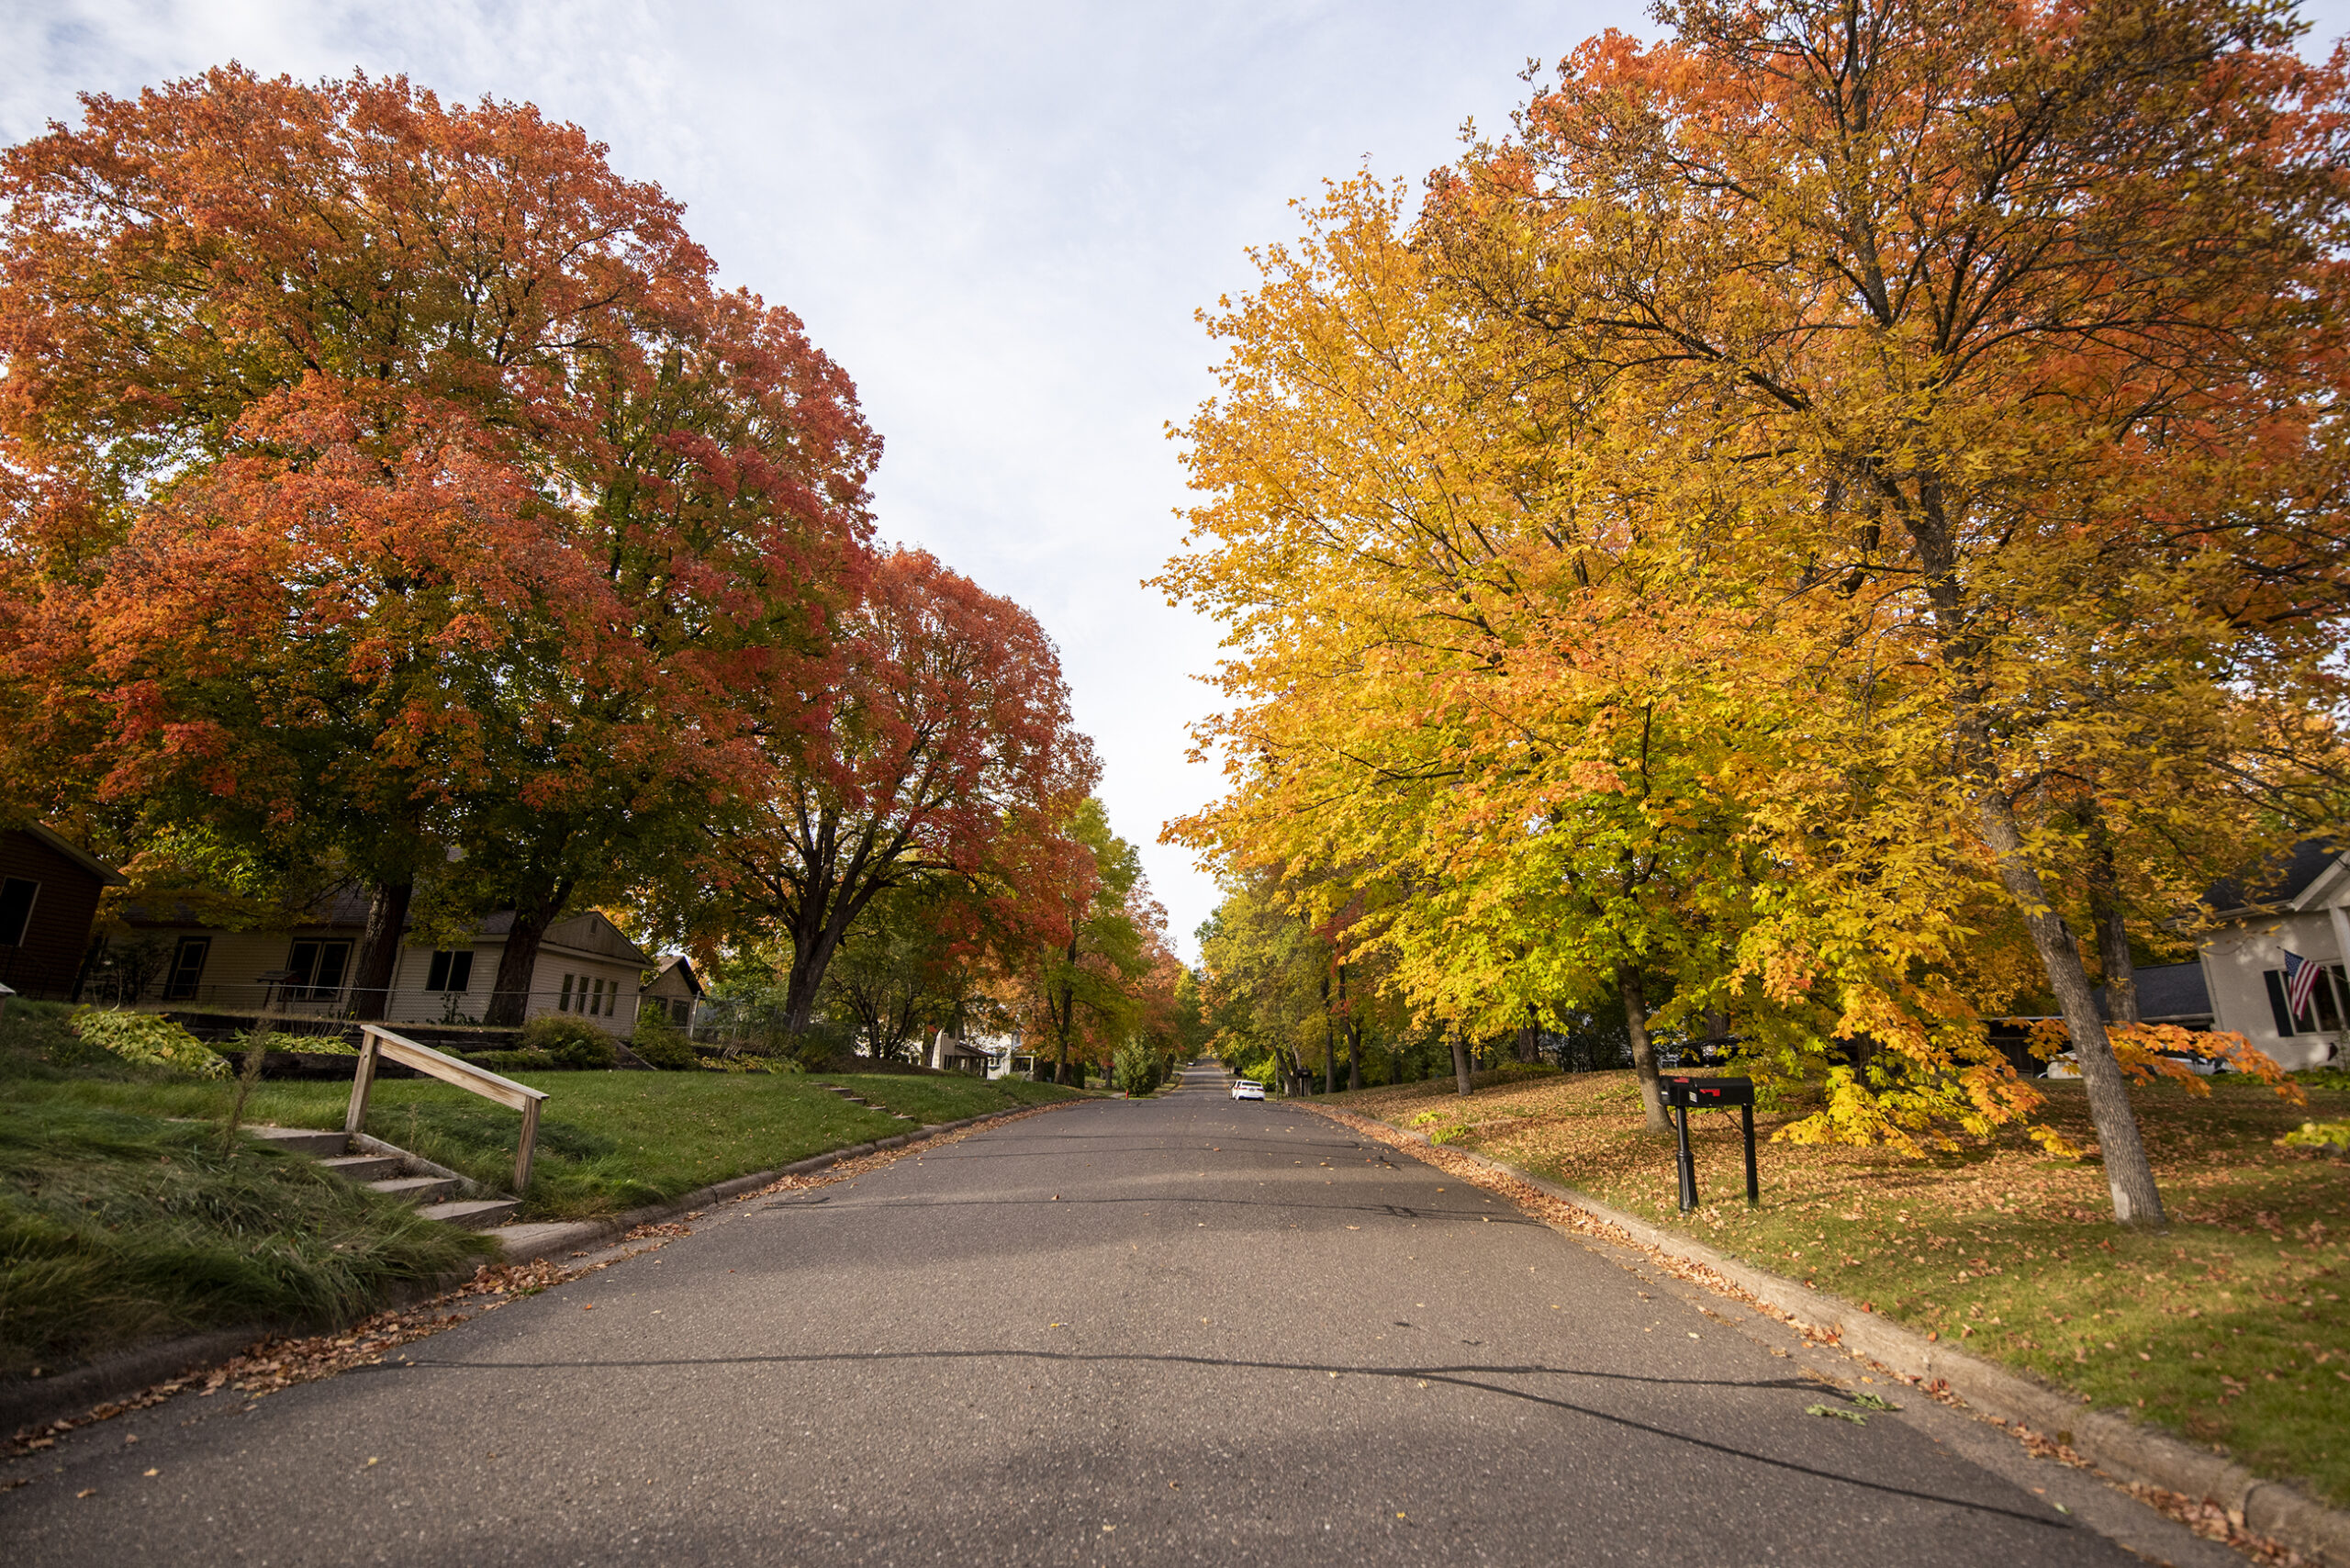 Trees with yellow and red leaves are seen along a street.